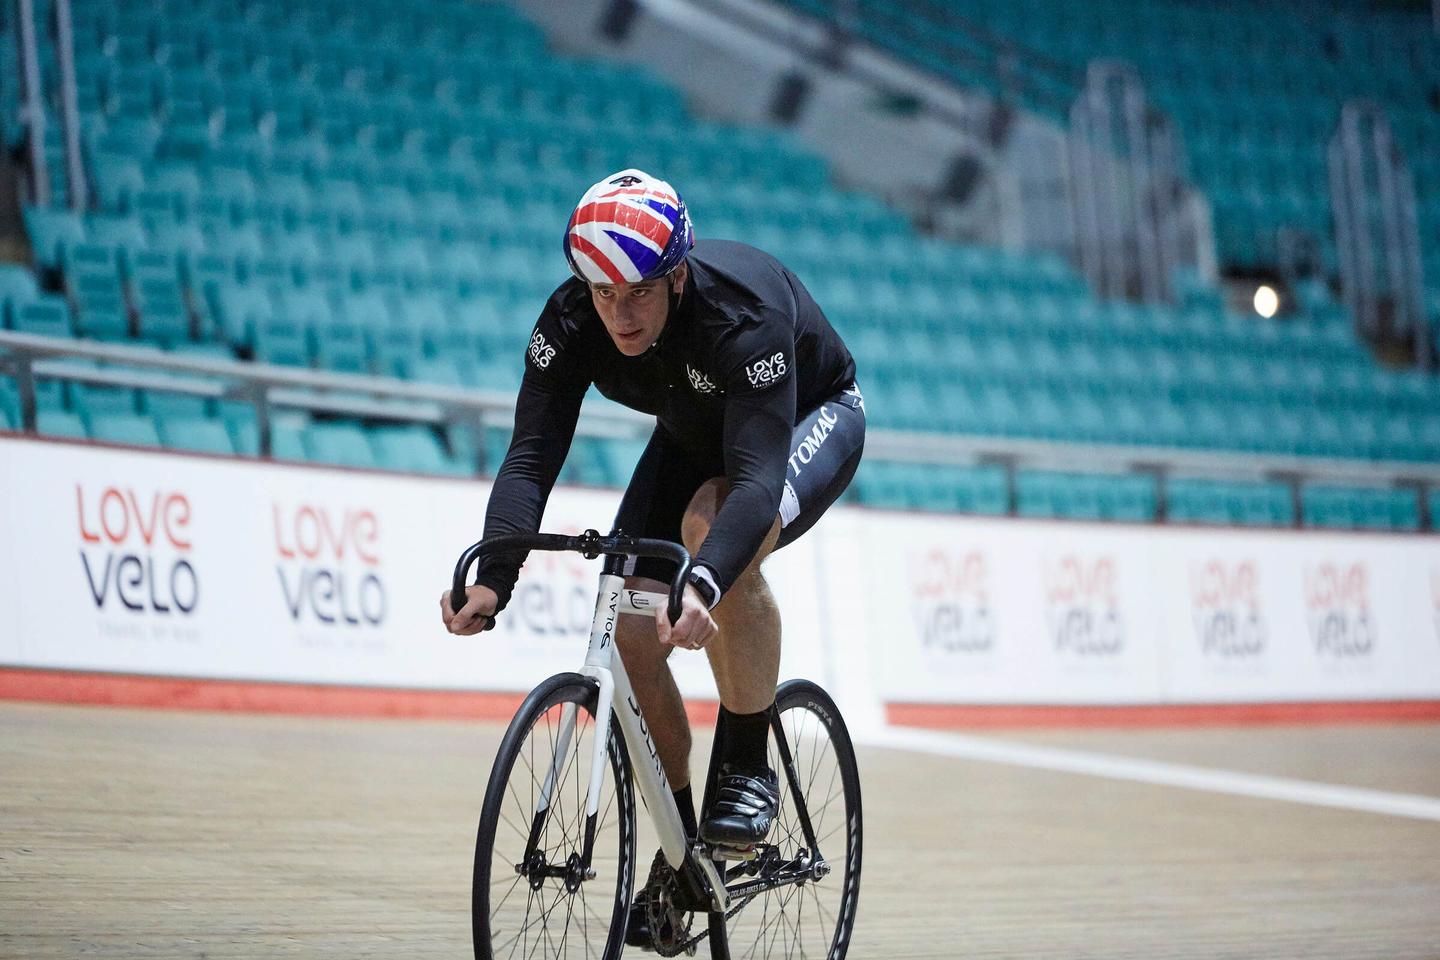 Cyclist riding on the track in the Manchester velodrome